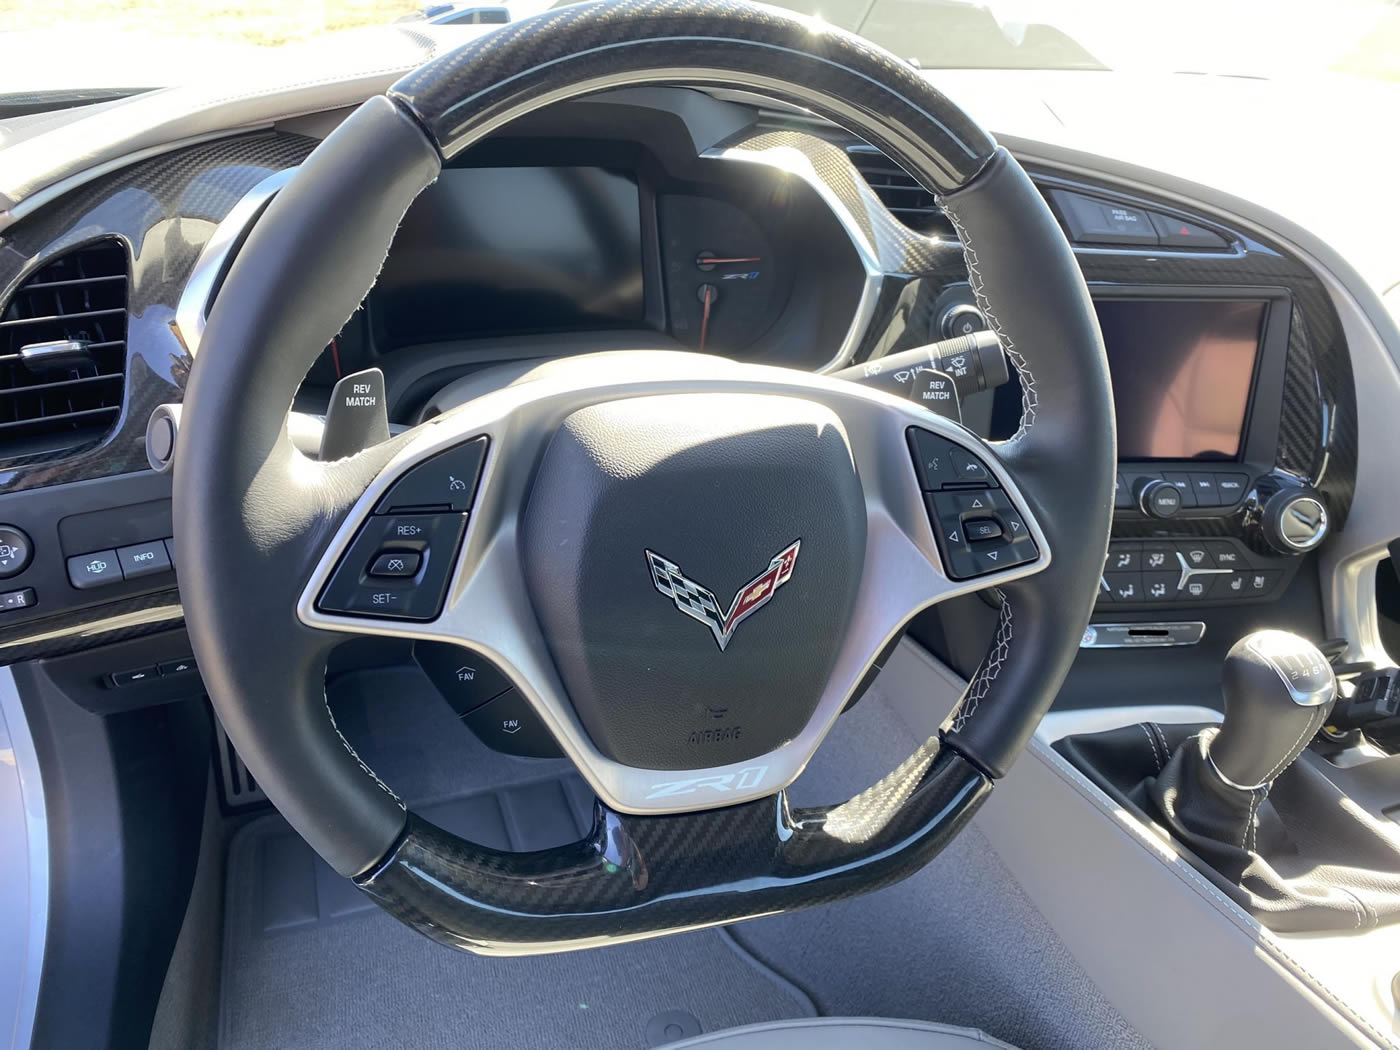 2019 Corvette ZR1 Coupe in Blade Silver Metallic - Number 1586